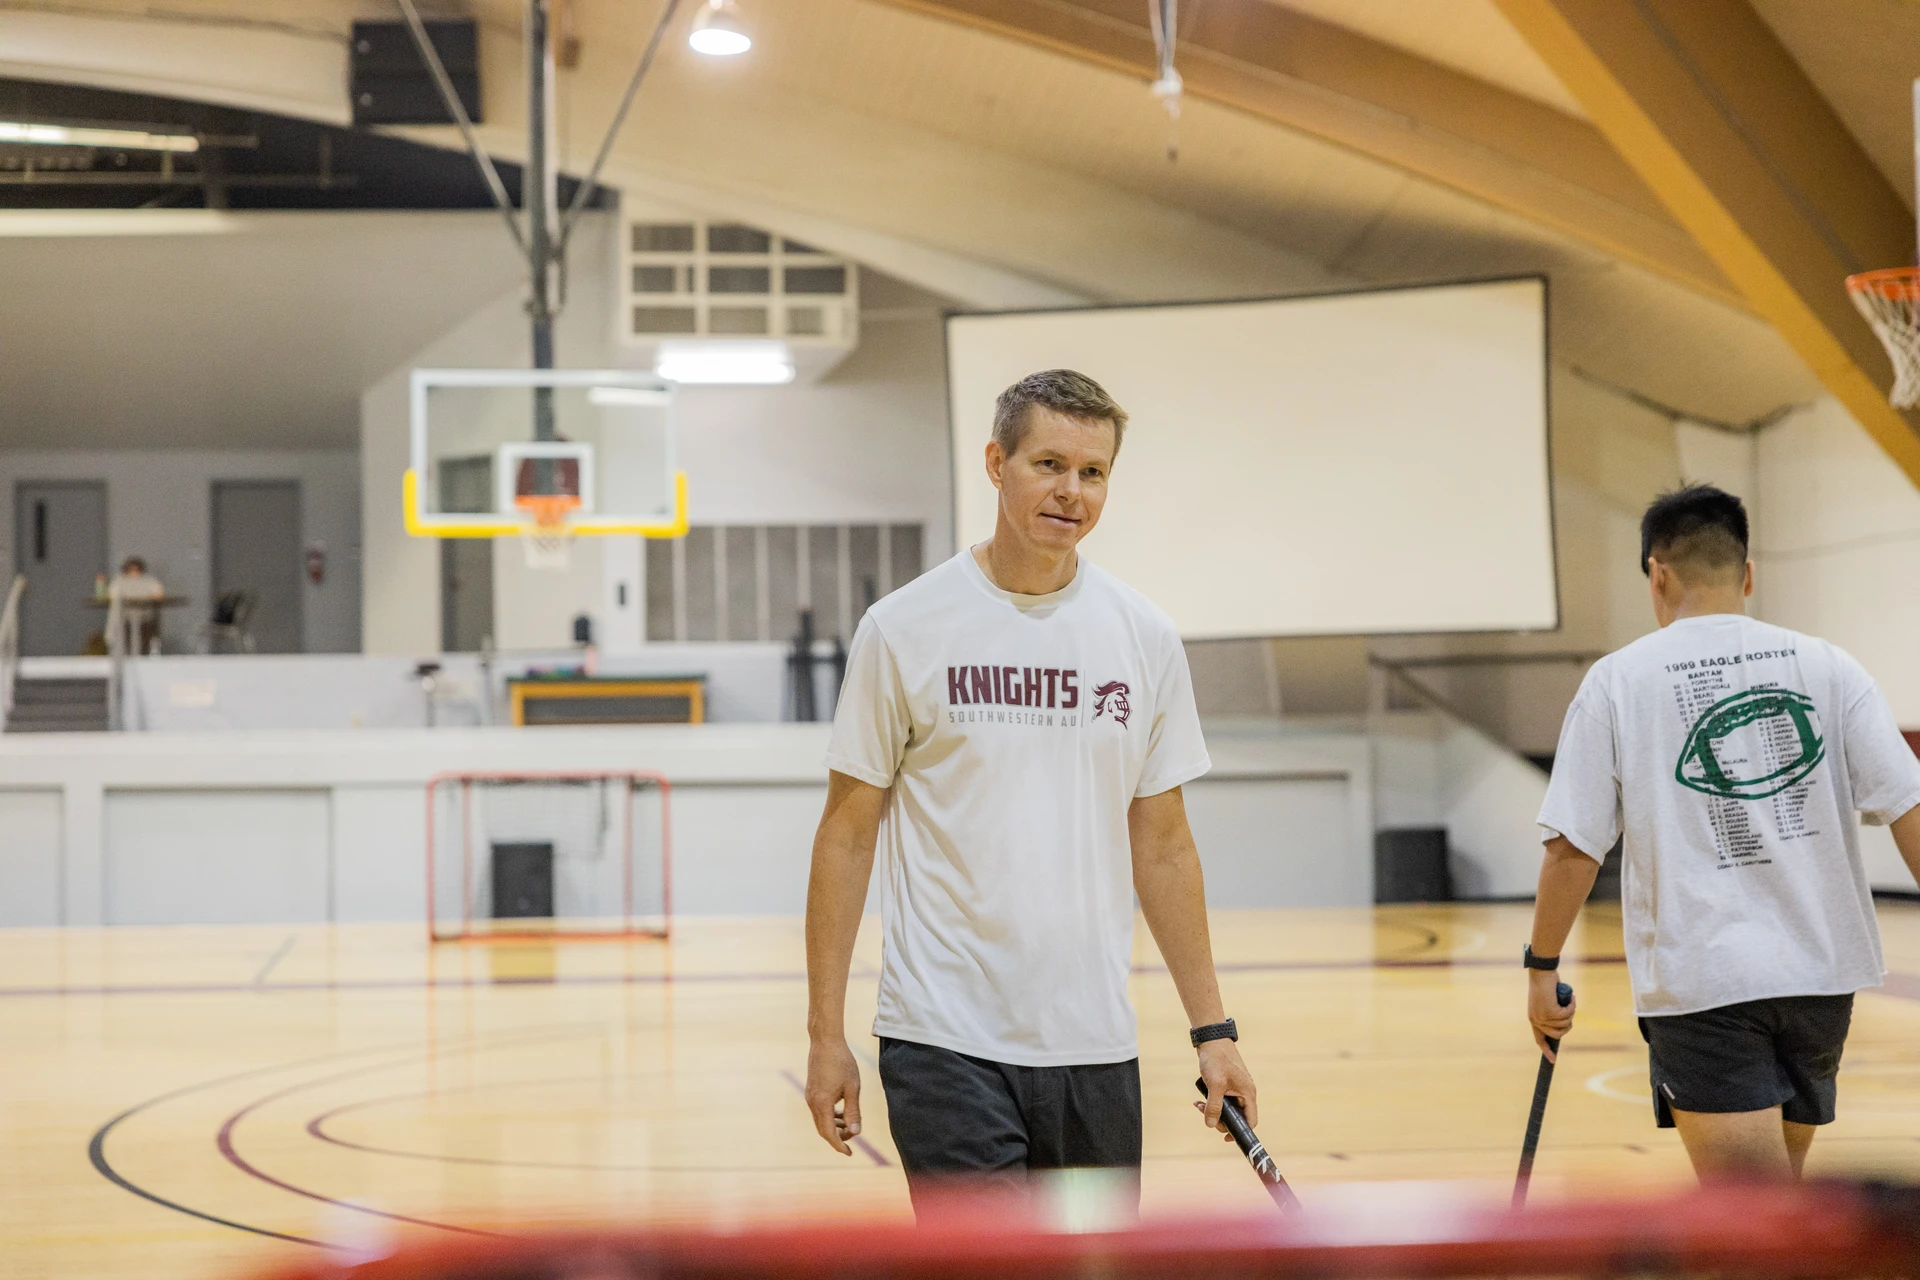 SWAU professor and student for health and fitness floorball at the gym